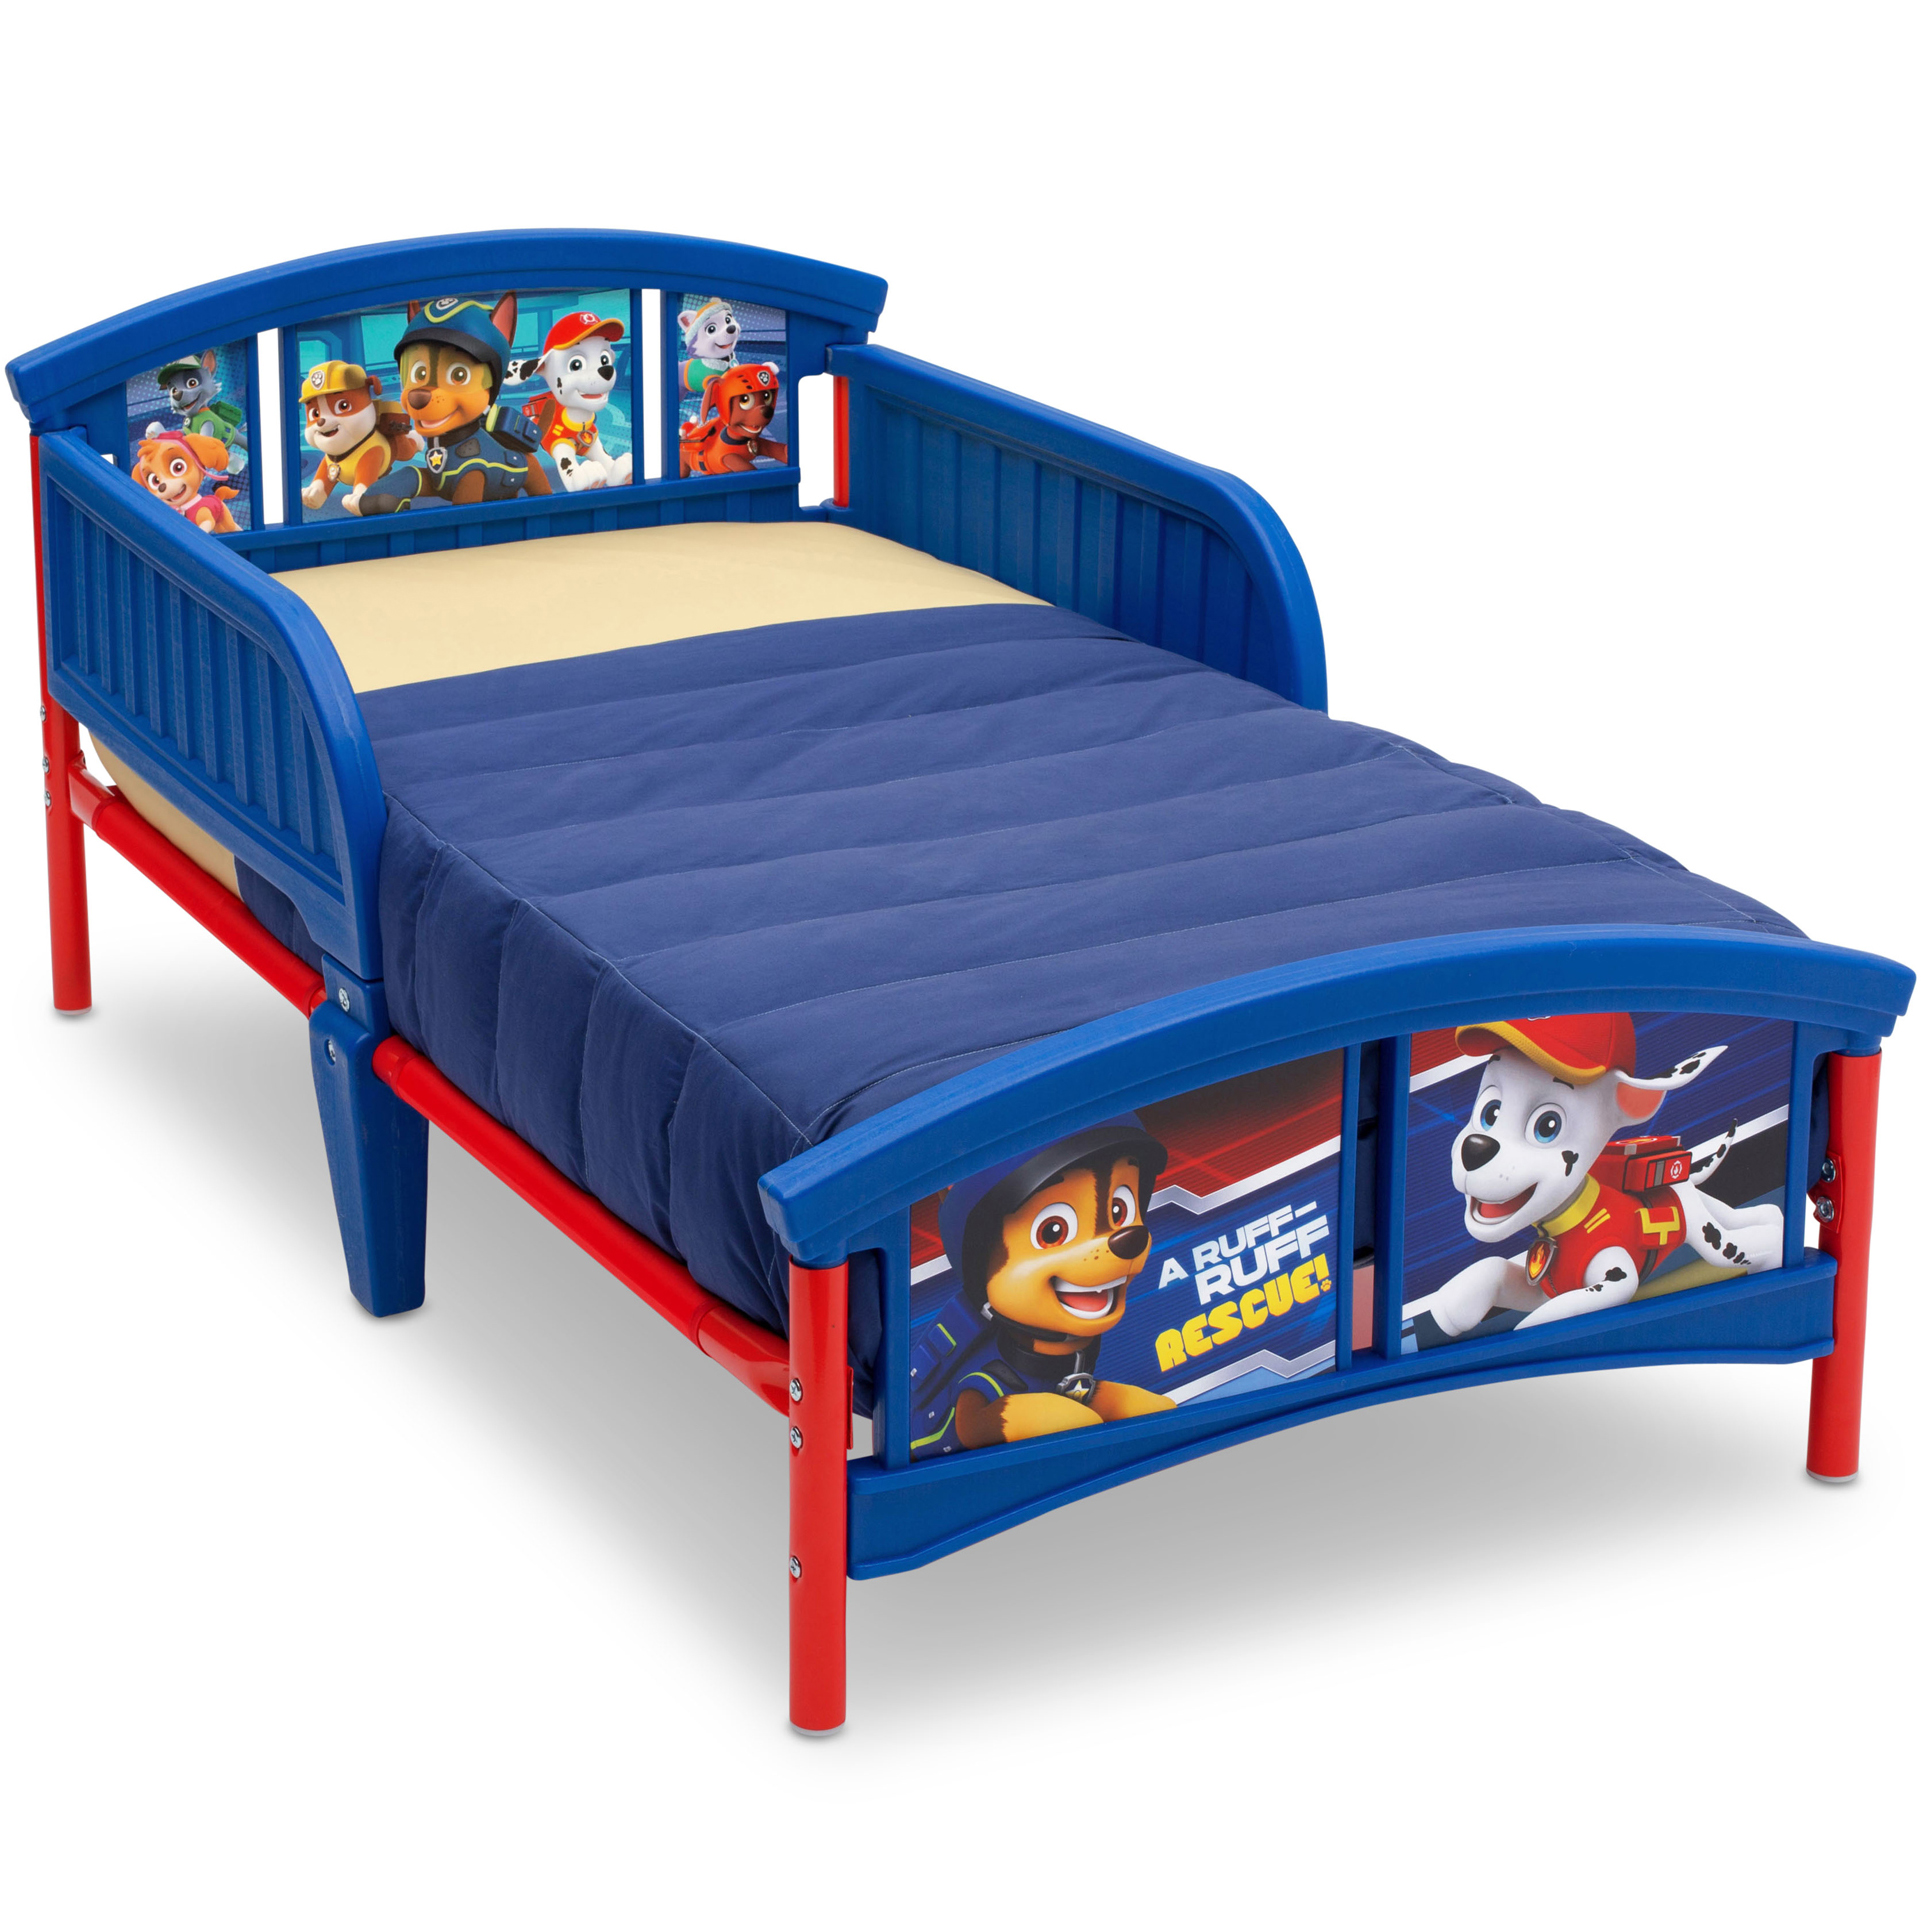 What to look for when buying a  toddler bed for boys